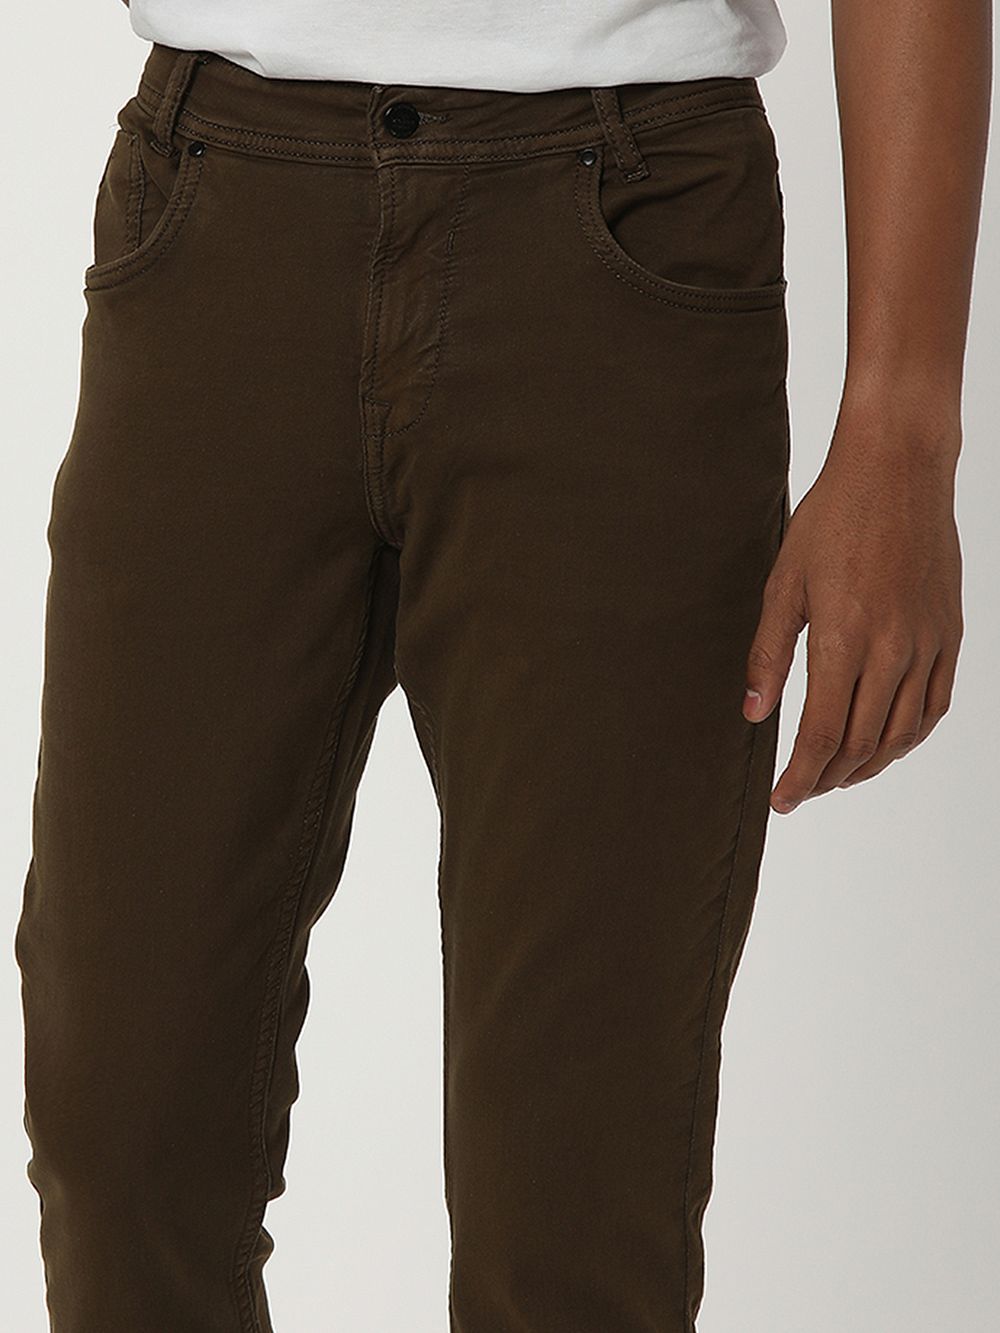 Olive Skinny Fit Superstretch Coloured Jeans